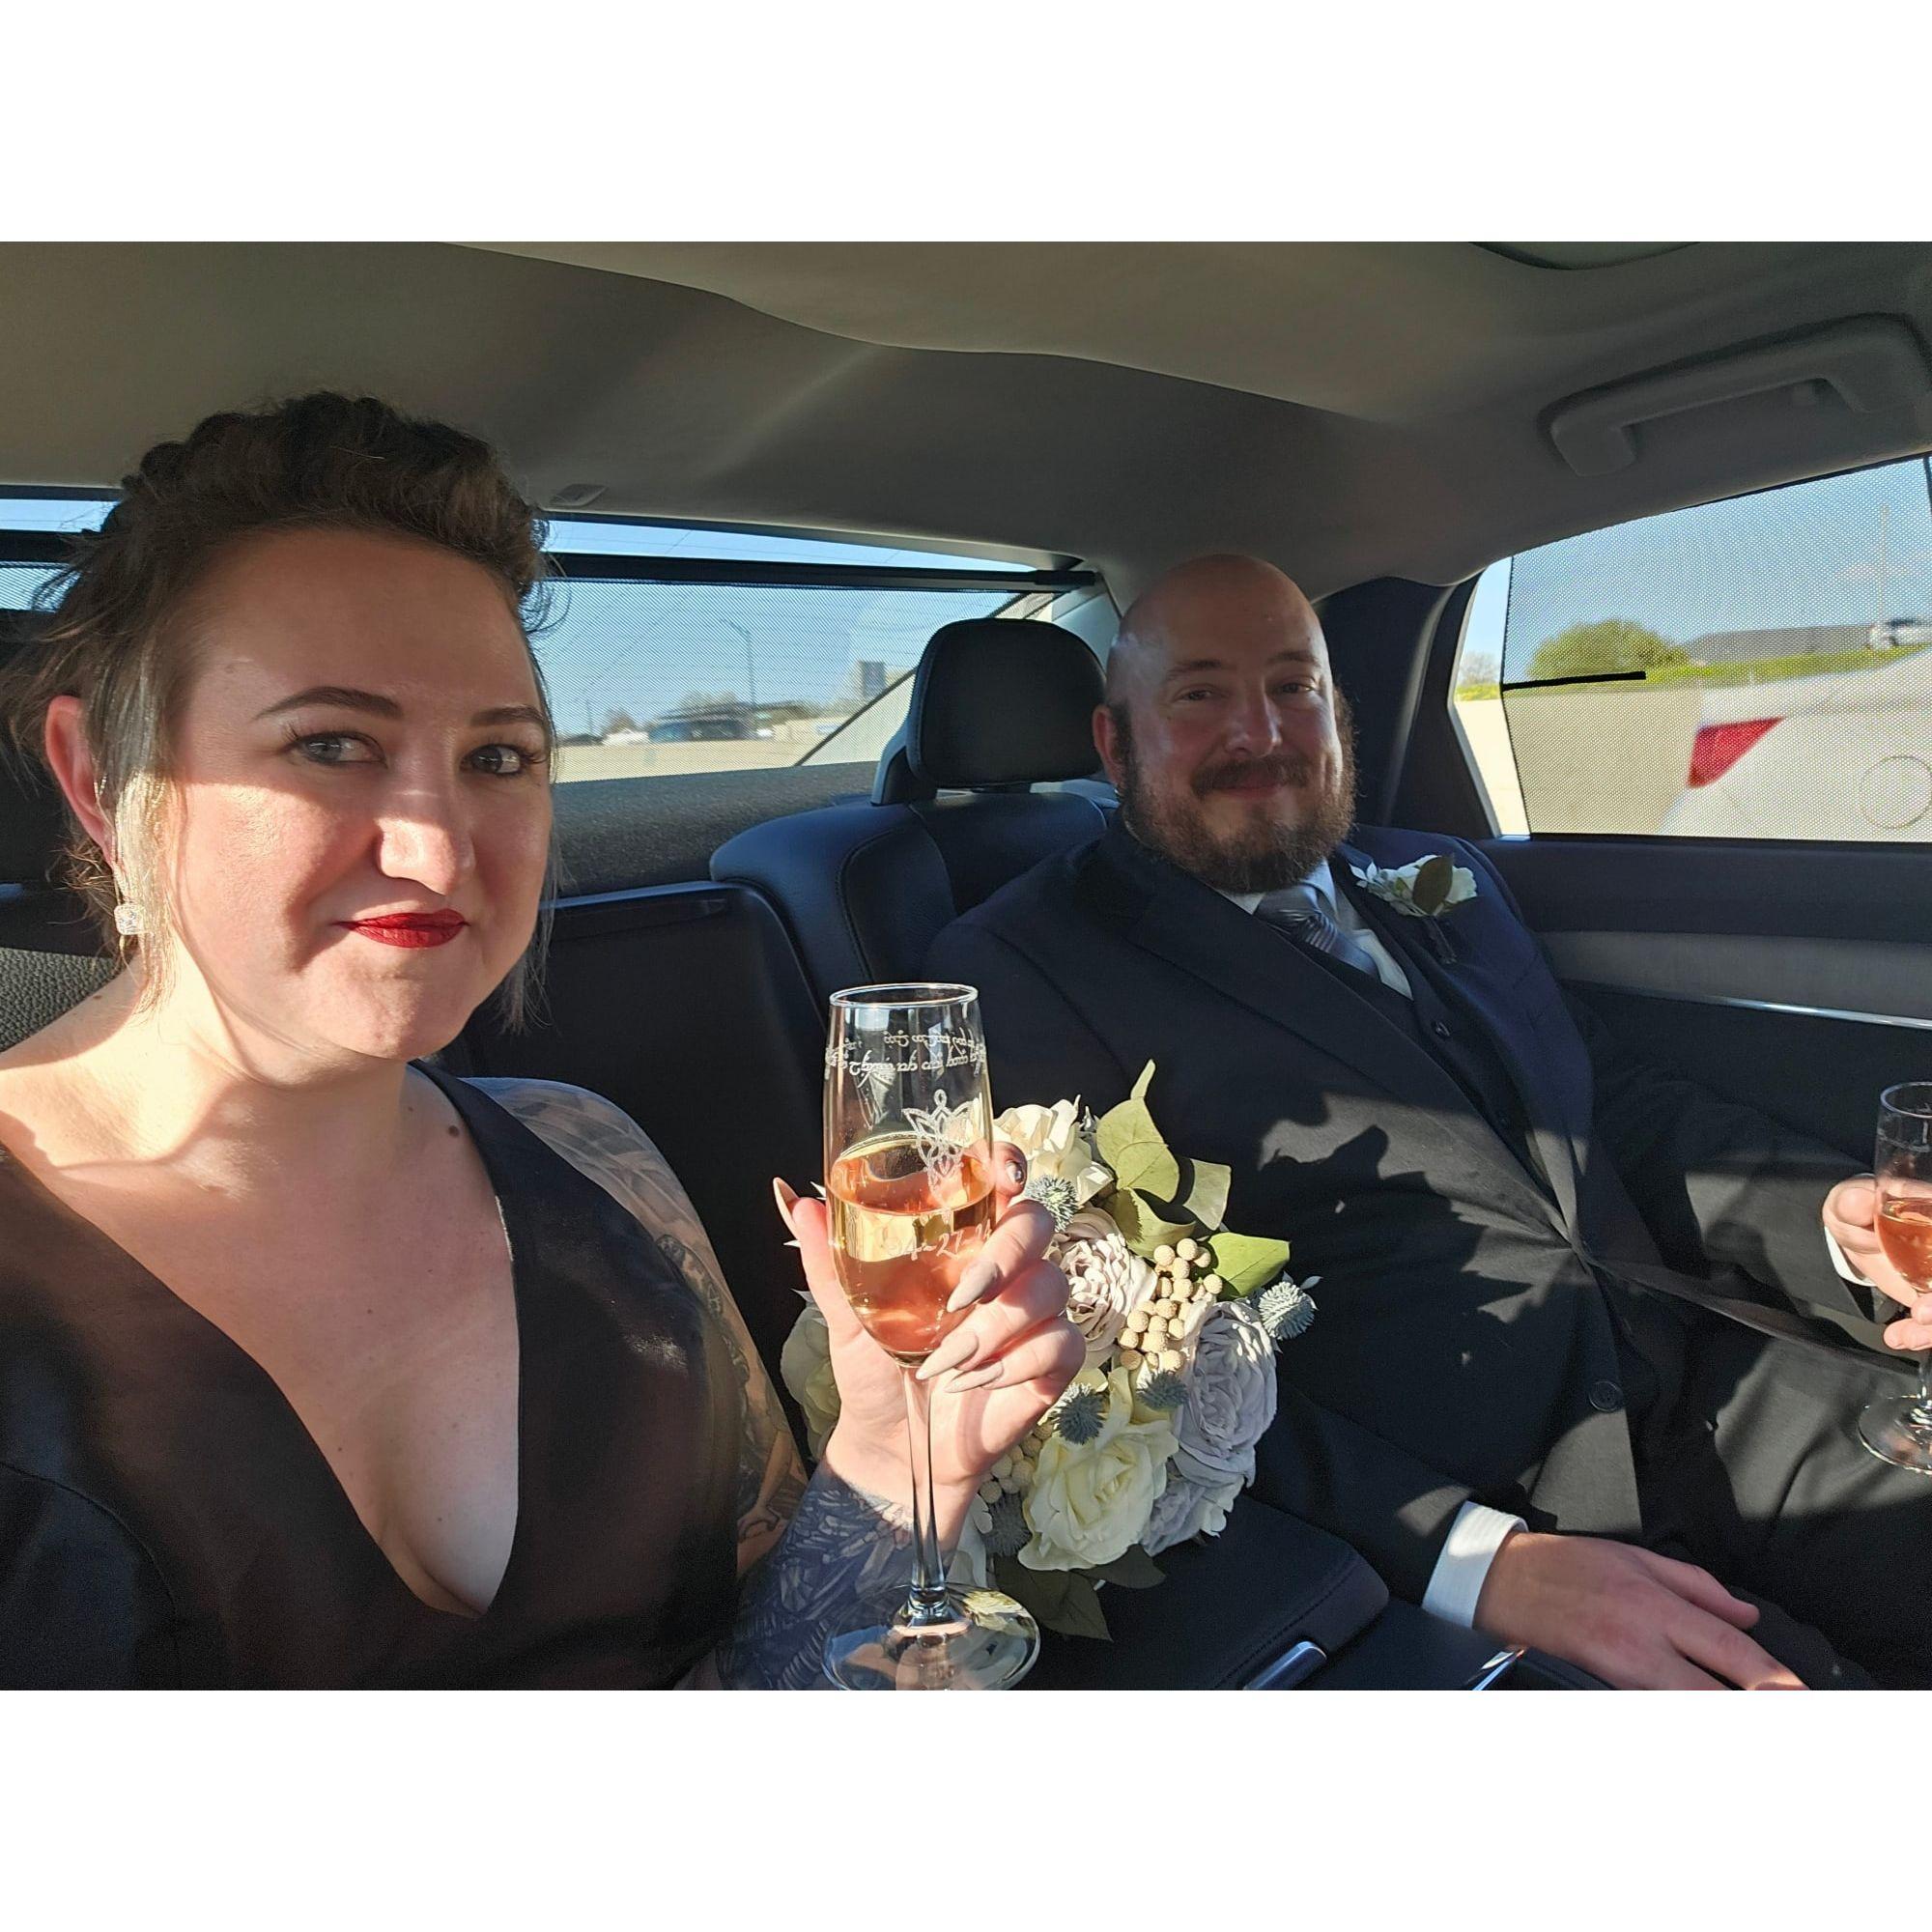 In the car on the way to dinner after we said, "I do!"